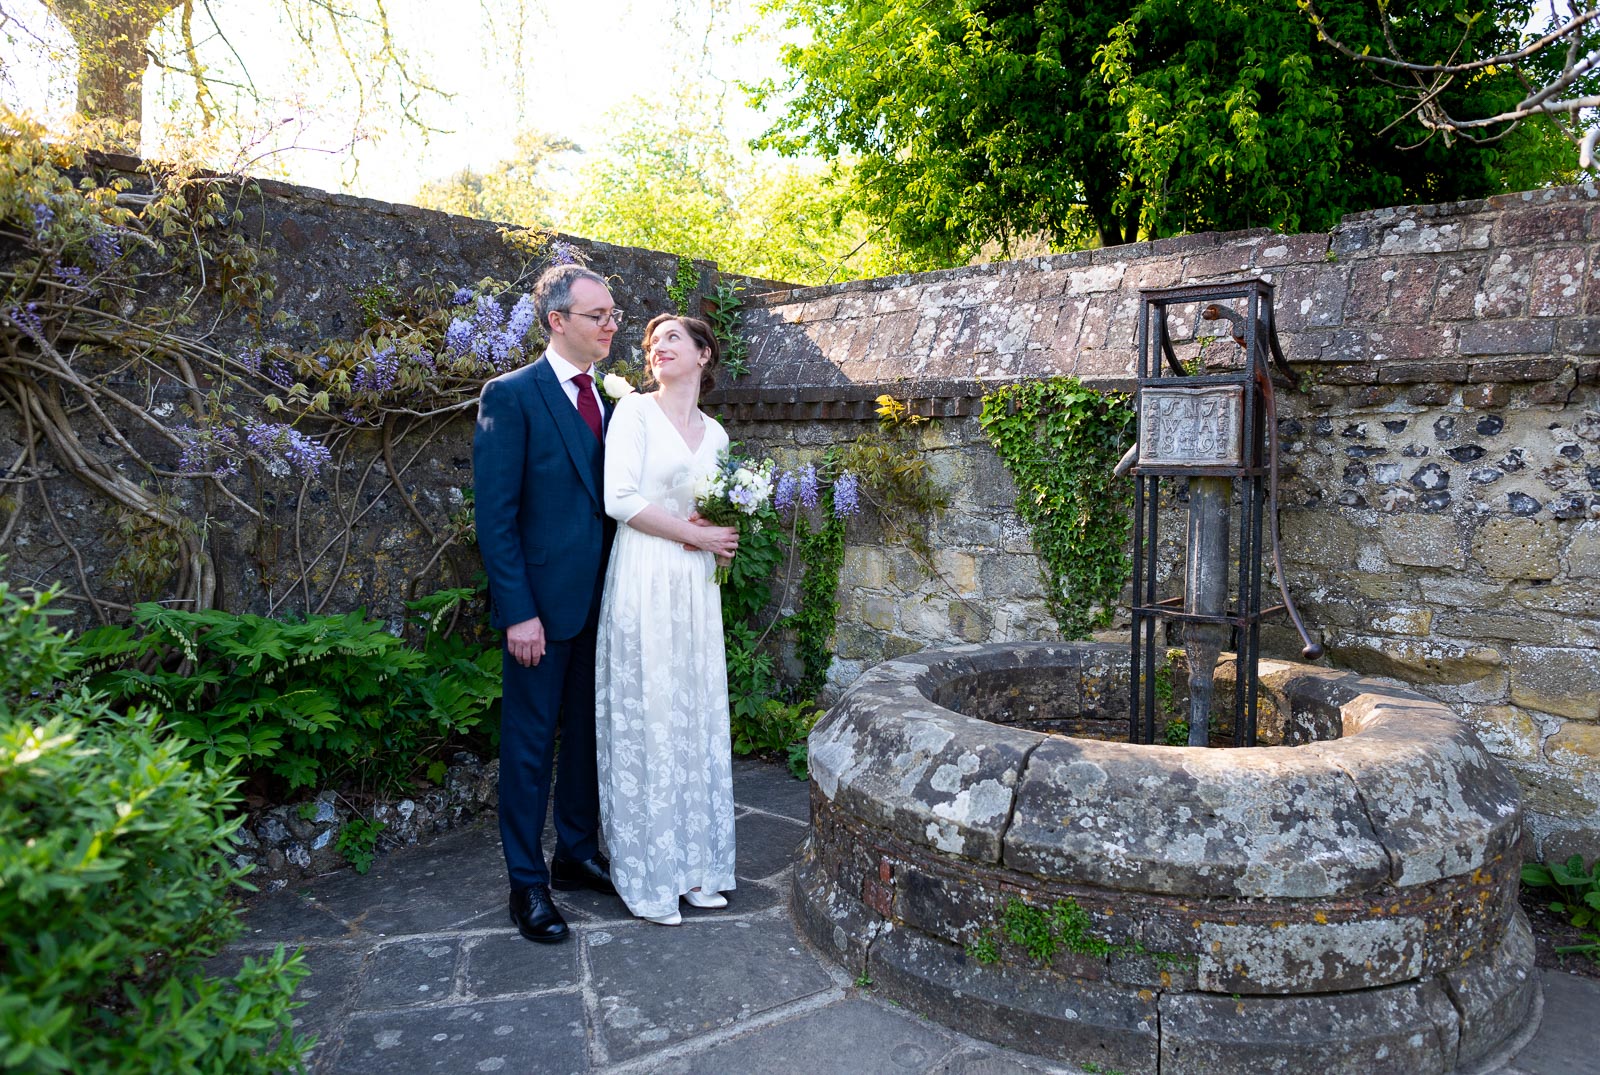 Alexis and Niell look at eachother at the ancient well in Southover Grange, Lewes after their wedding.